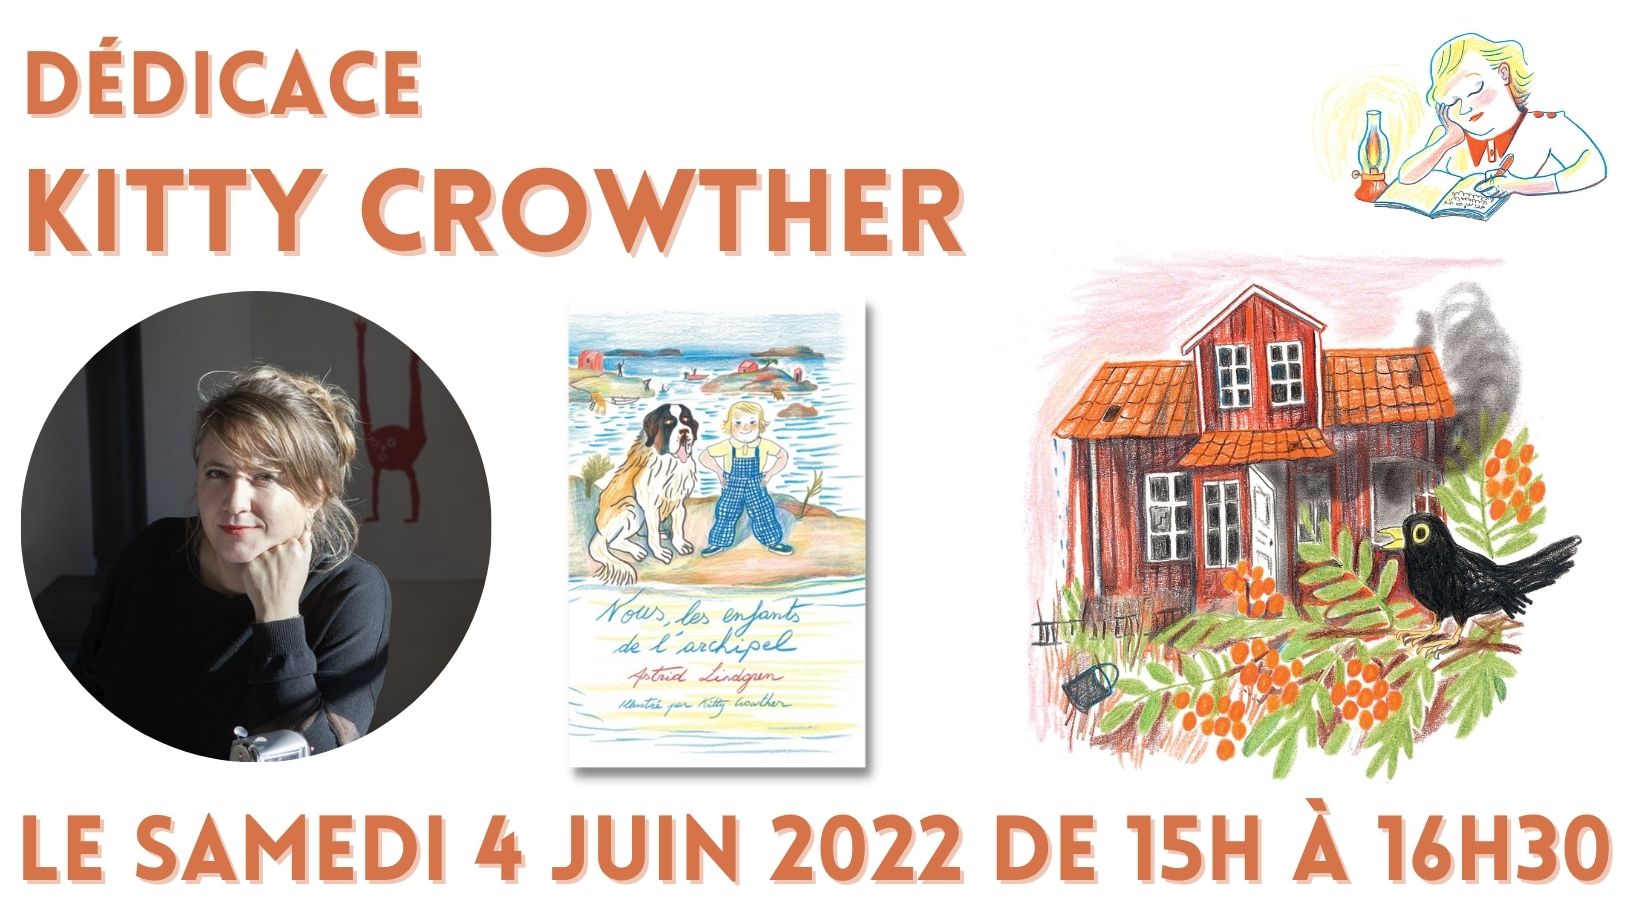 Kitty Crowther en dédicace